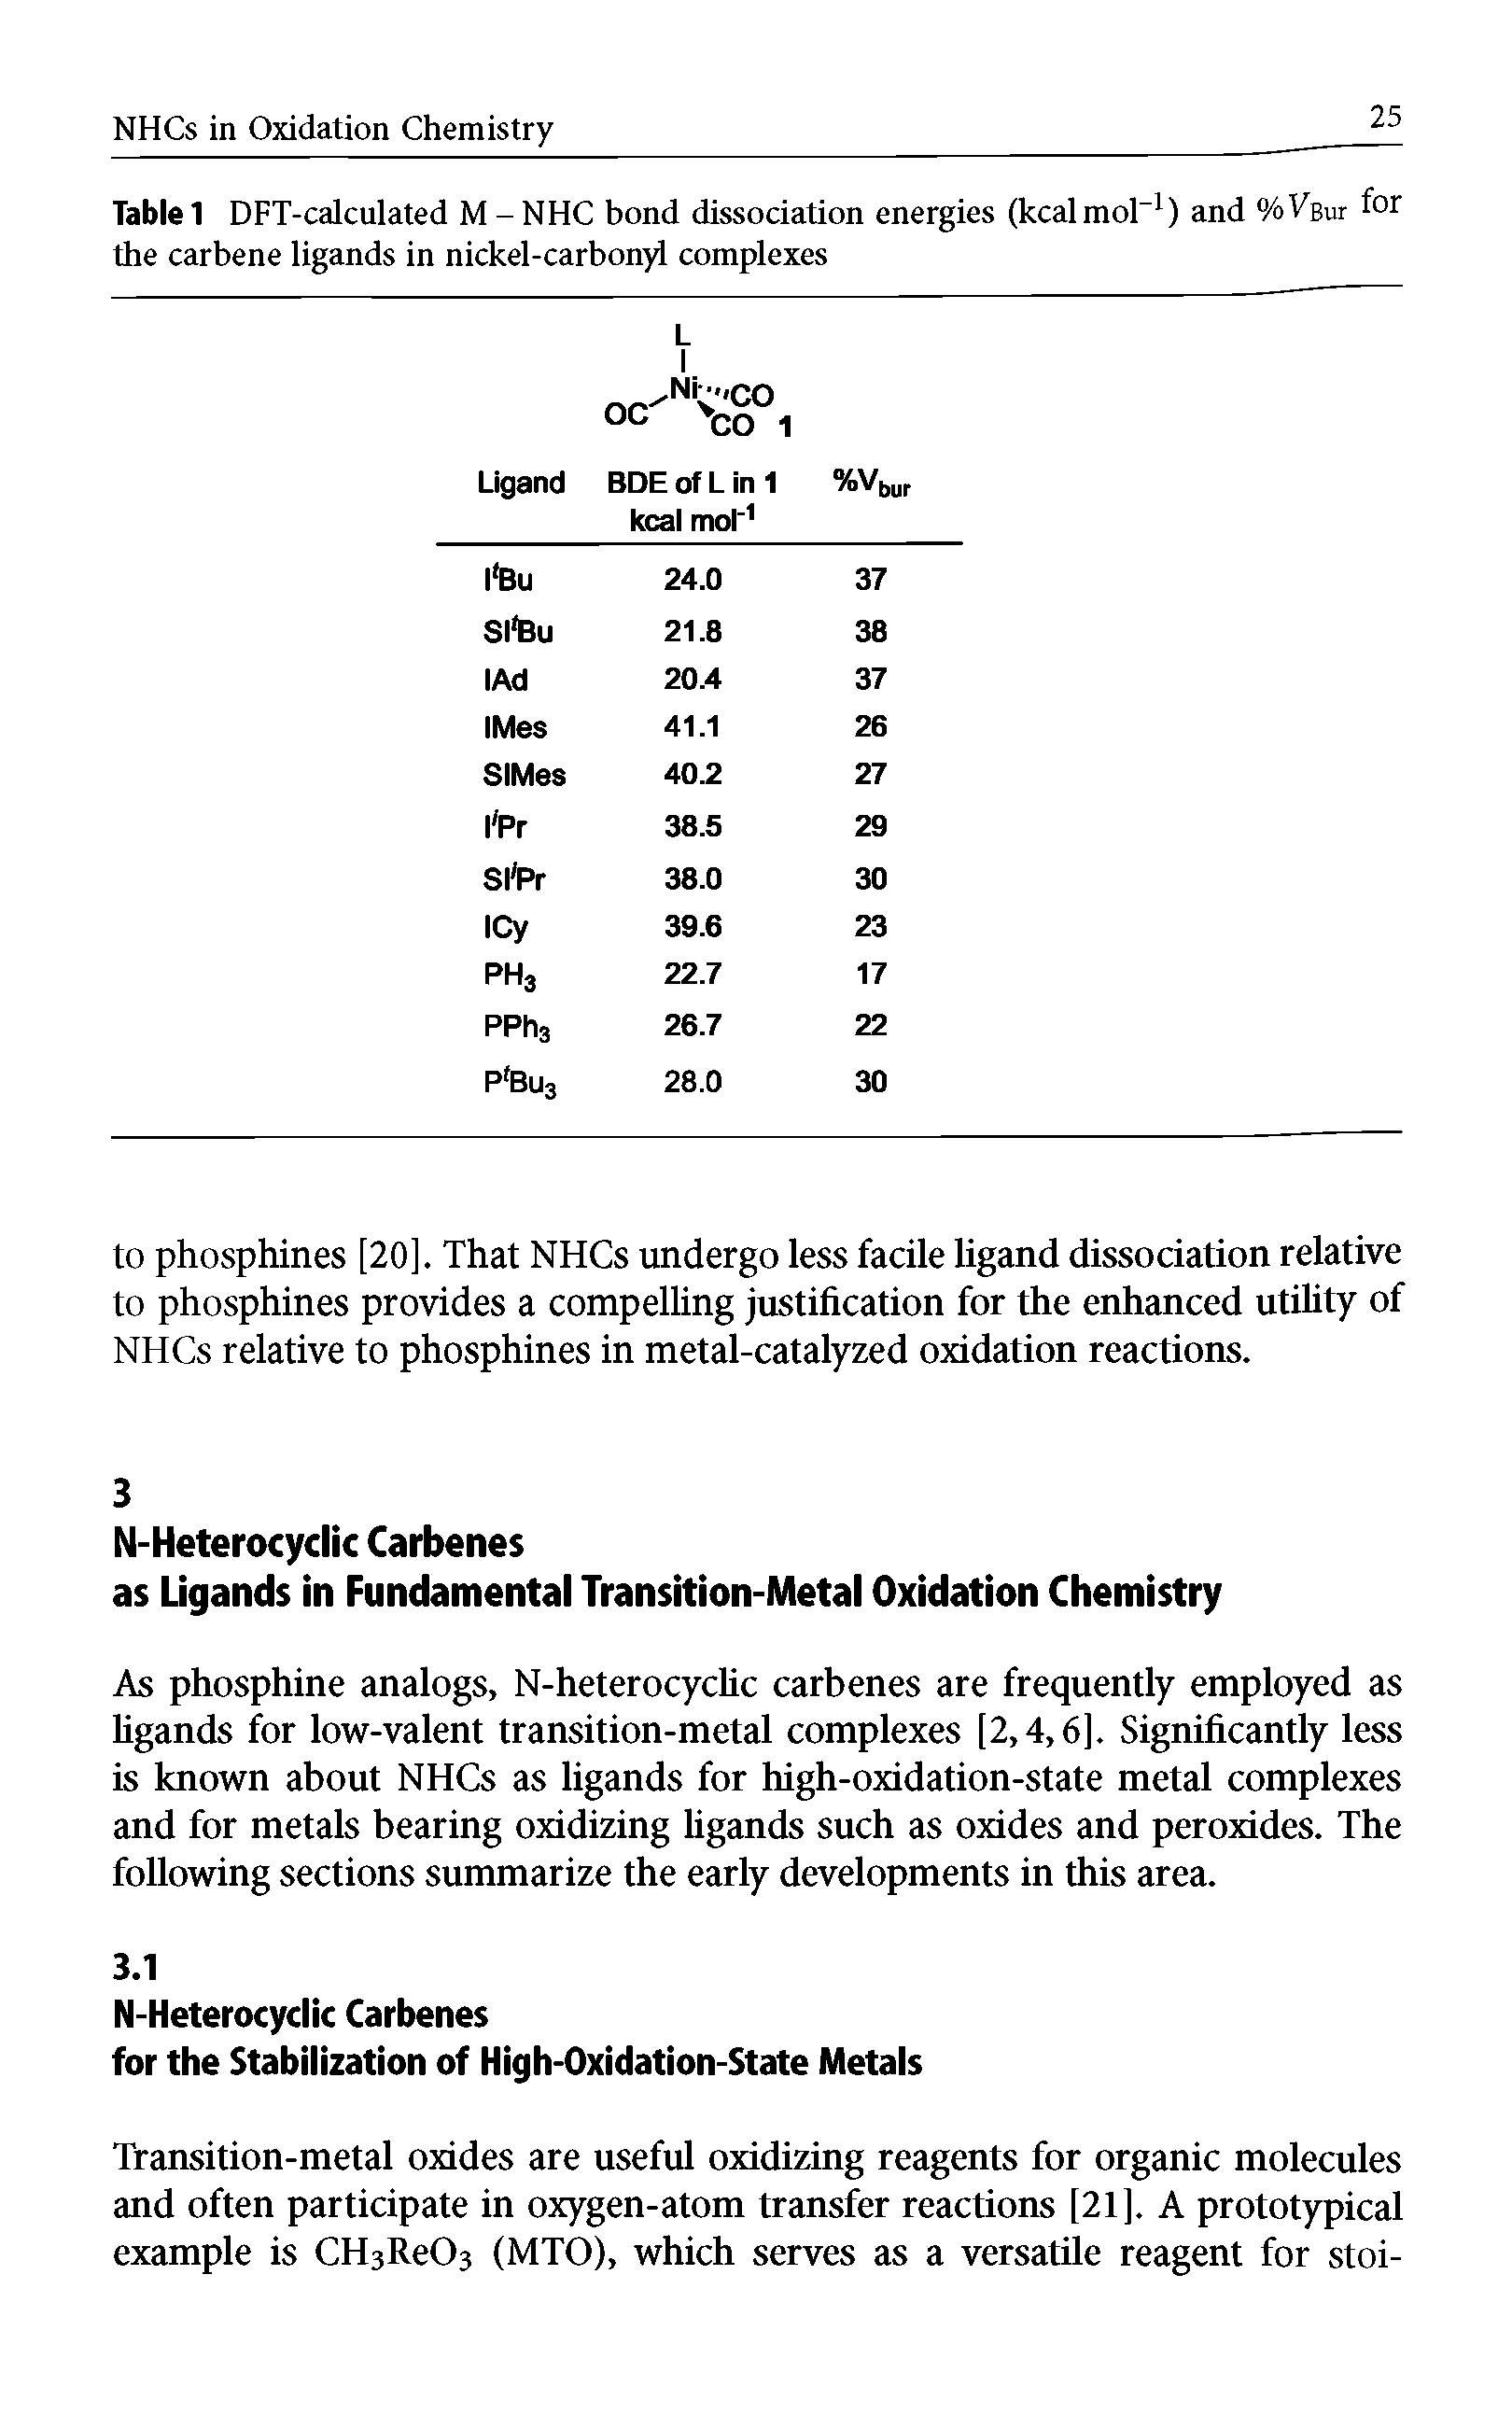 Table 1 DFT-calculated M-NHC bond dissociation energies (kcalmol 1) and °/oVbut f°r the carbene ligands in nickel-carbonyl complexes ...